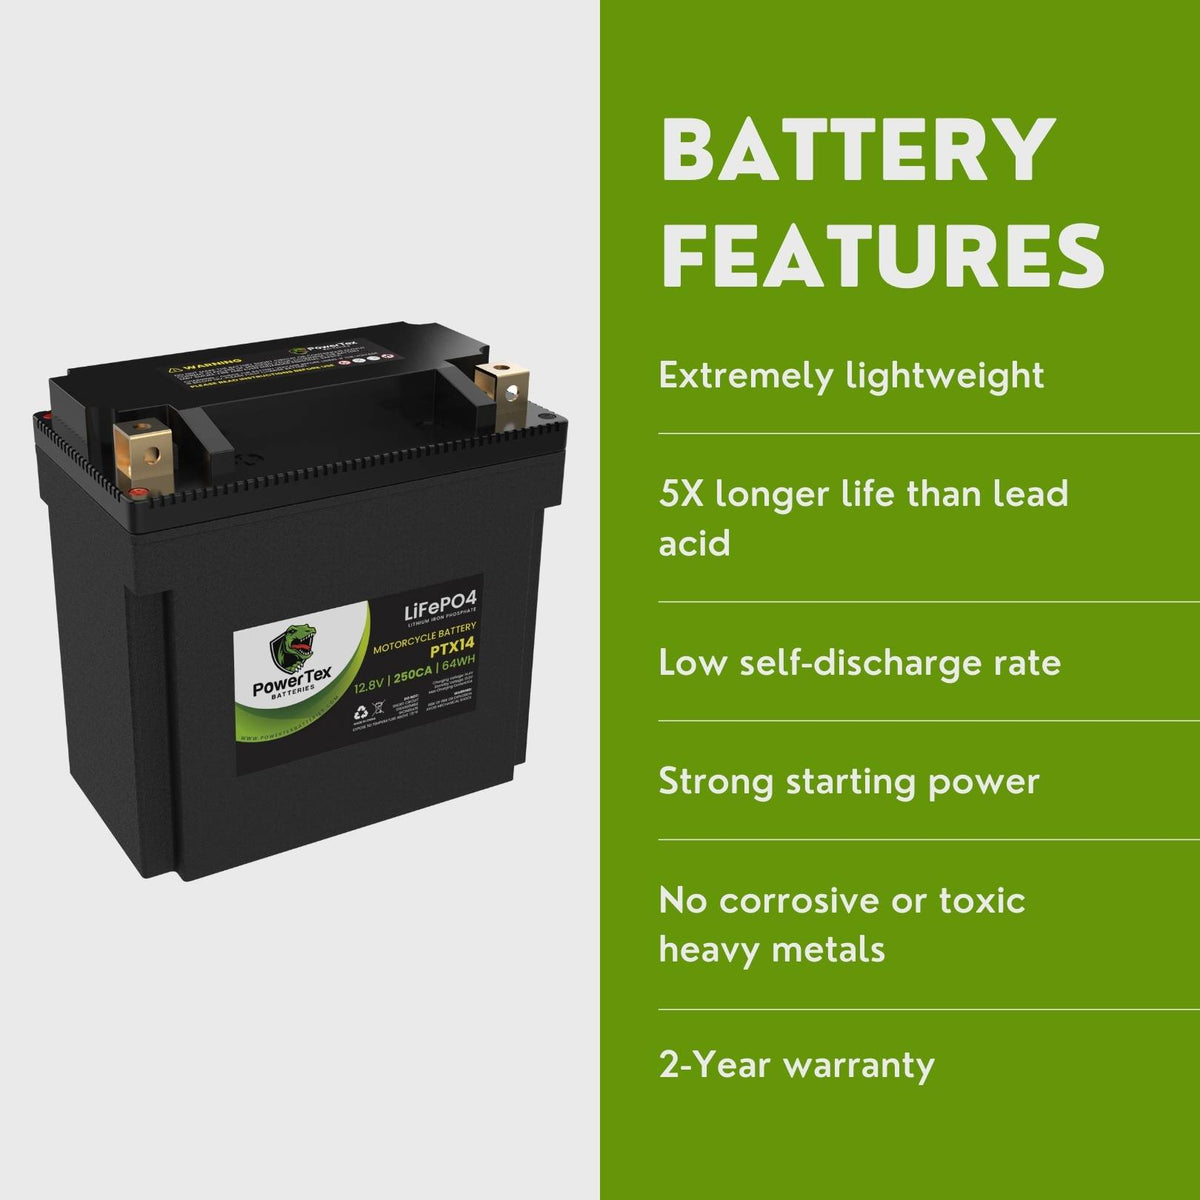  Lithium Motorcycle Battery YTX14-BS 12V Lithium